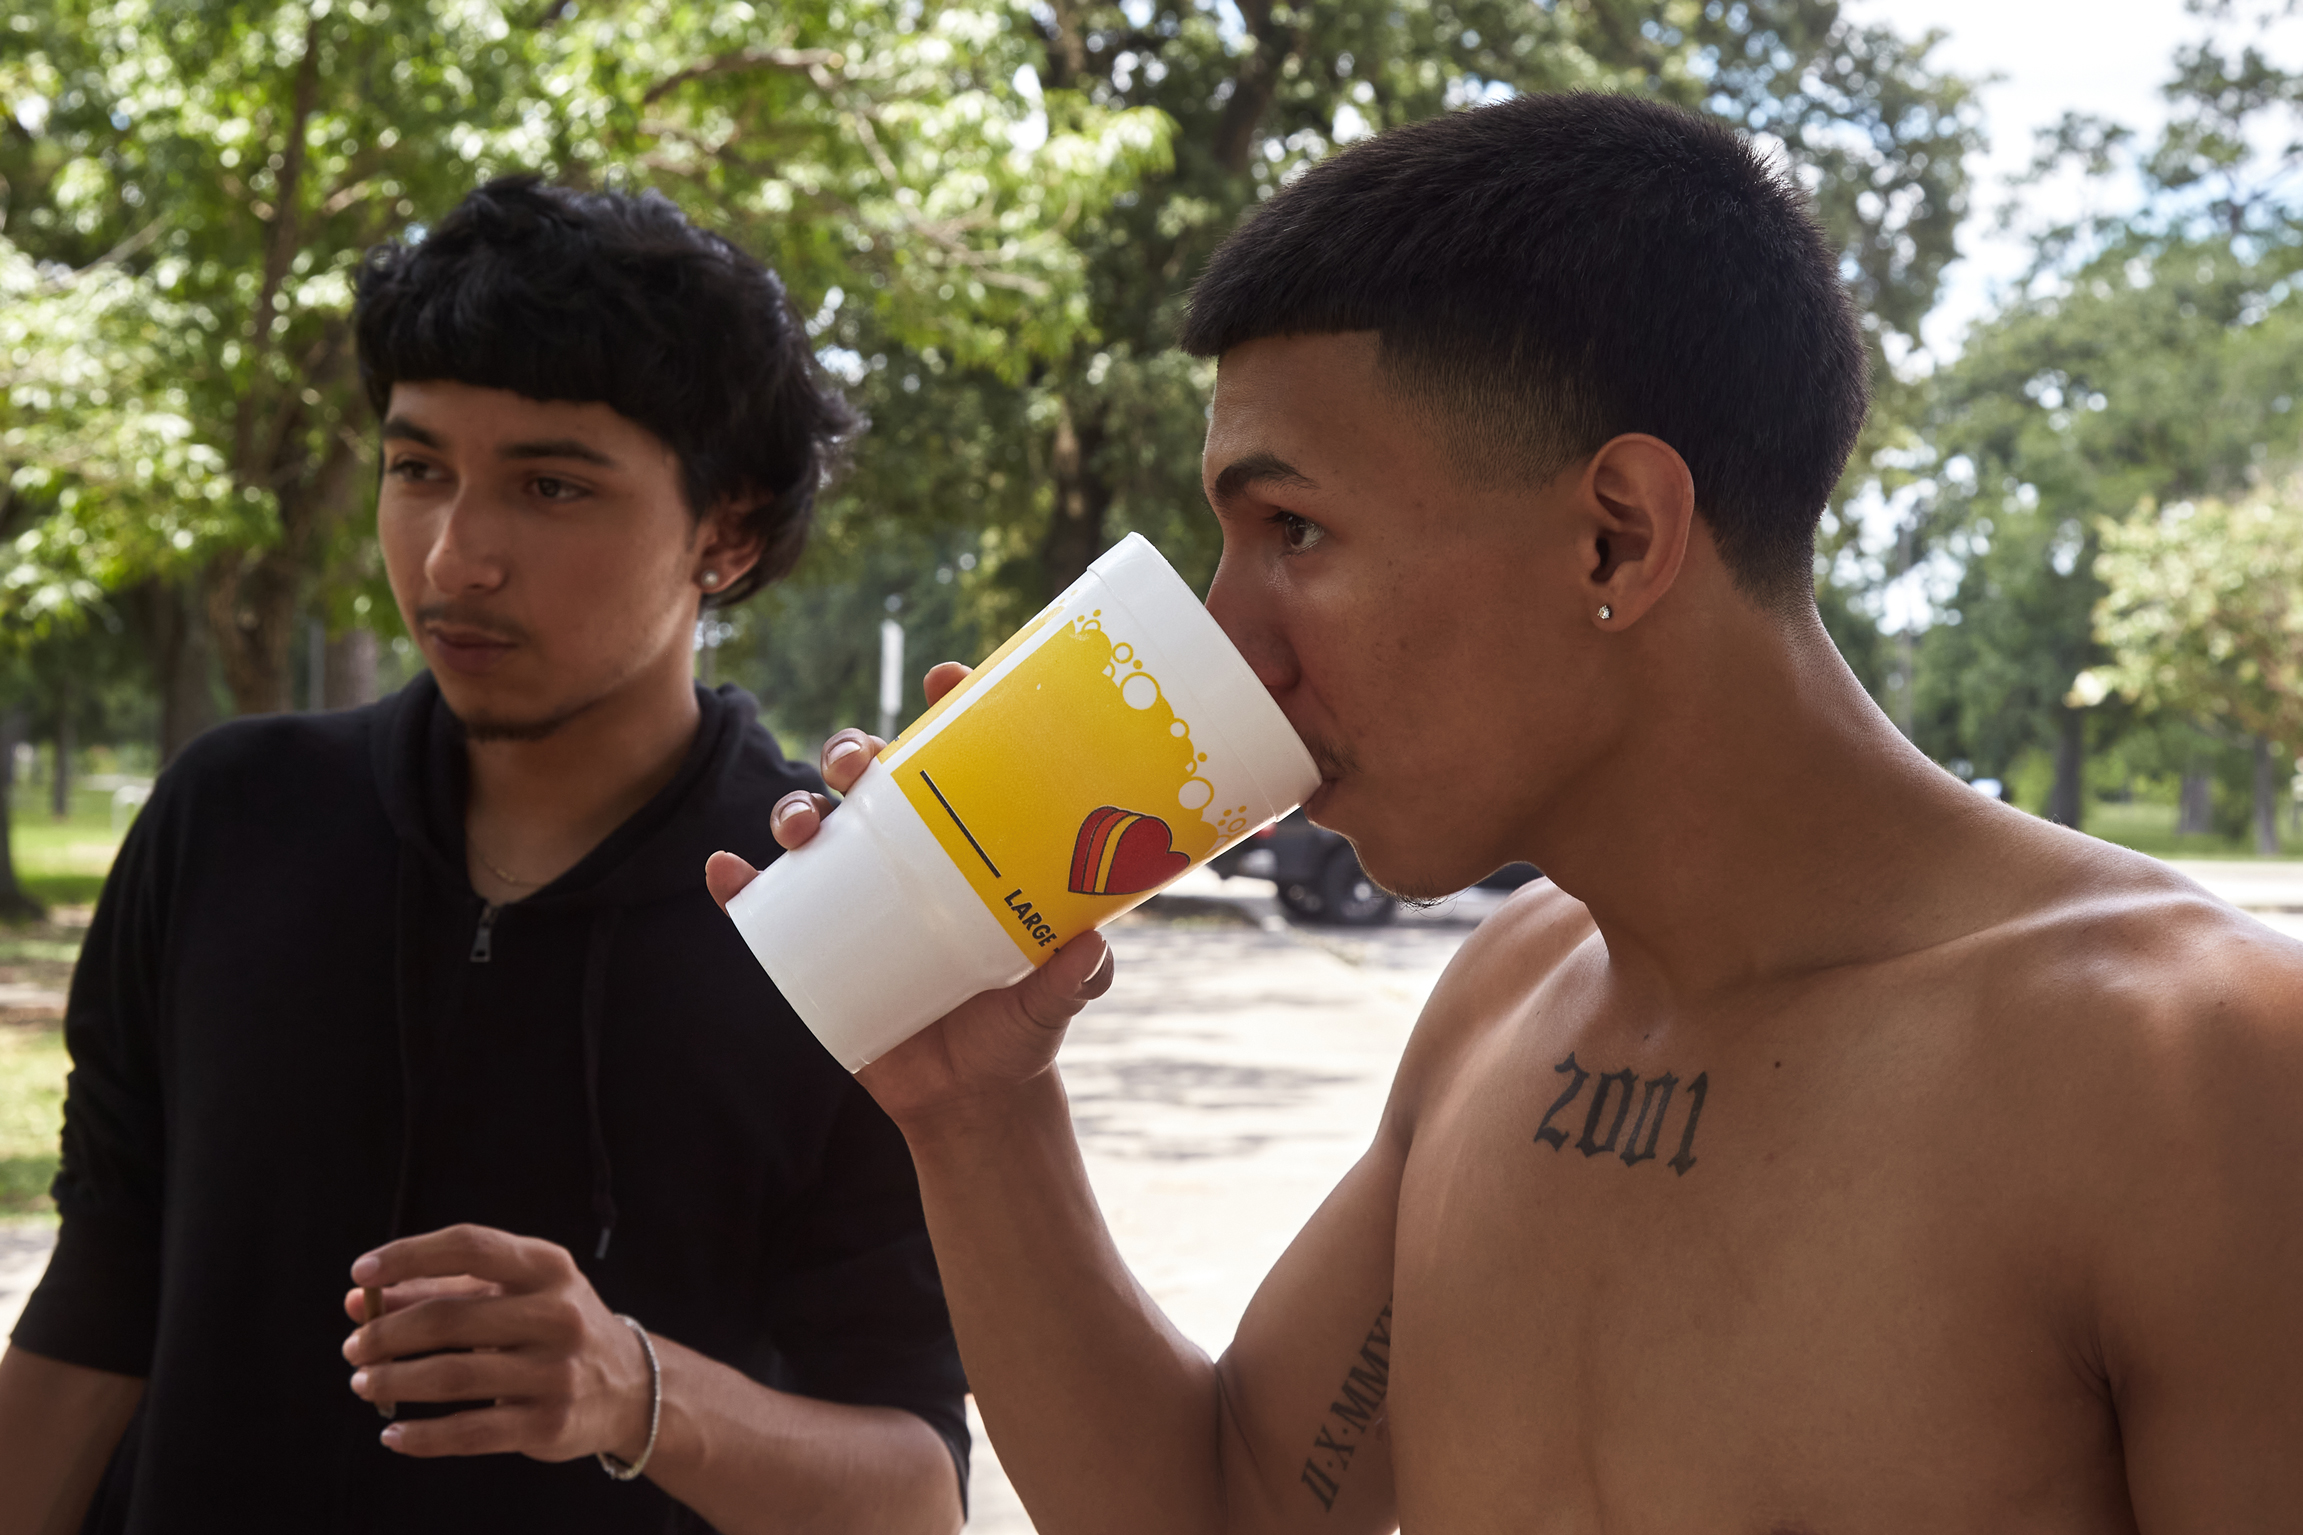 A young man drinks a beverage during a hot day